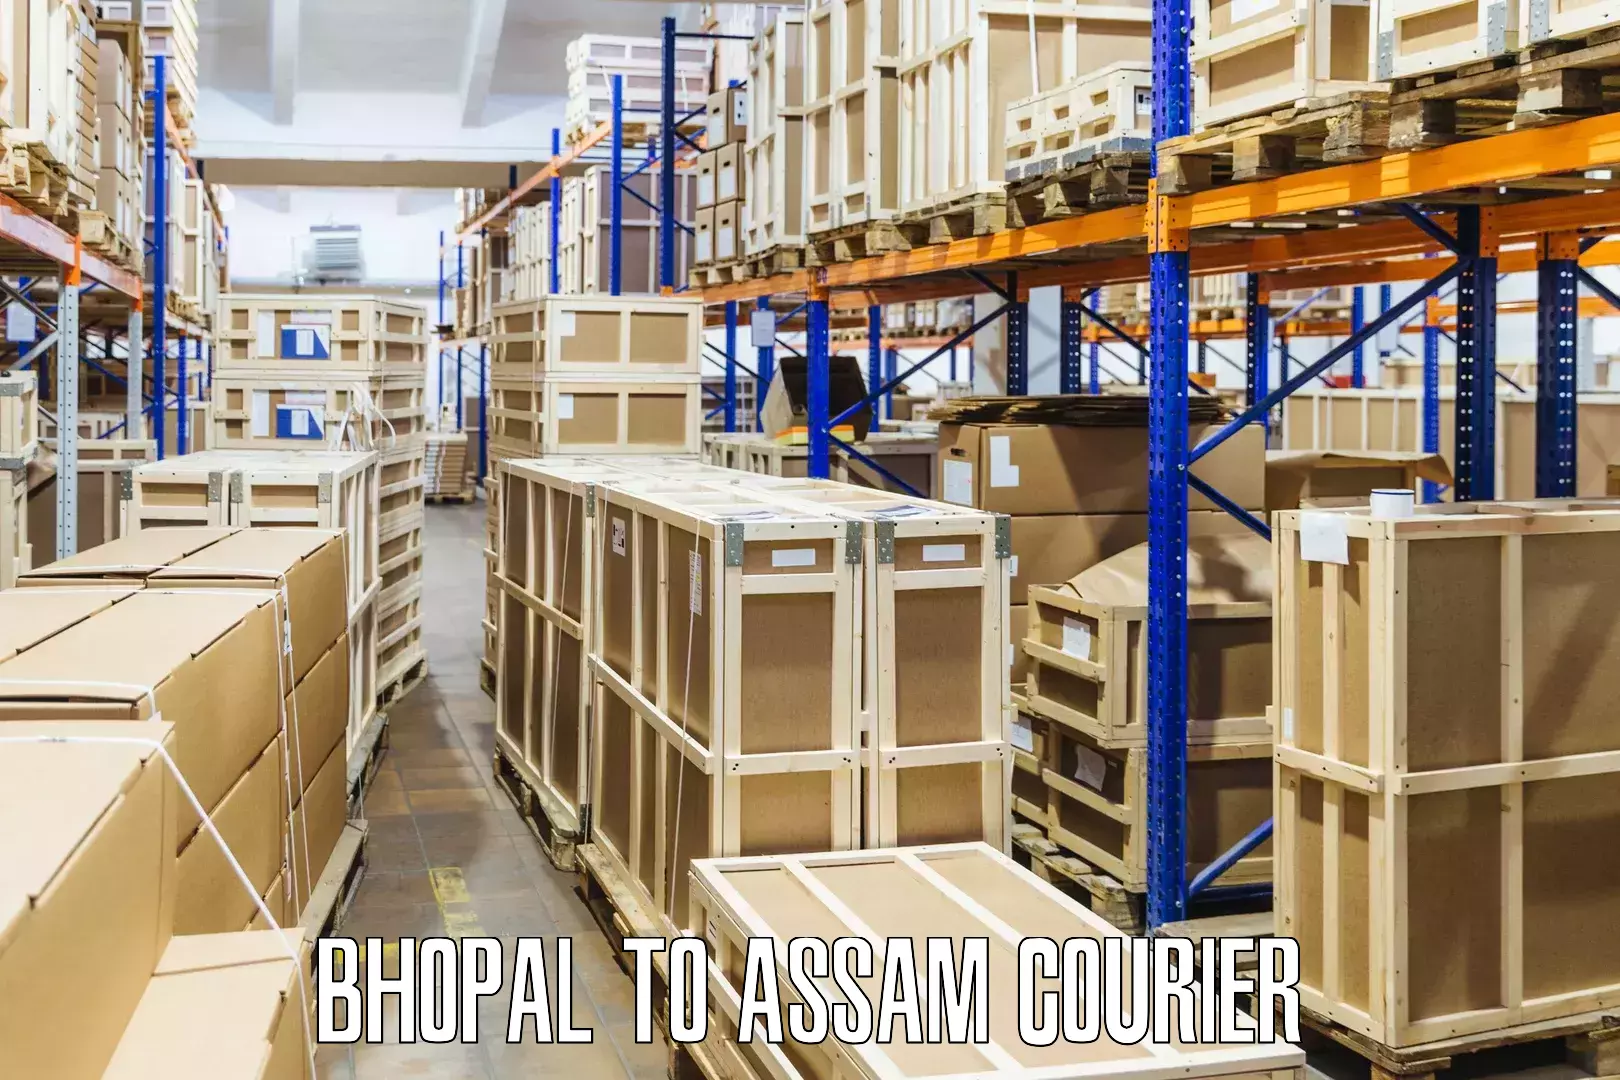 Seamless shipping experience Bhopal to Assam